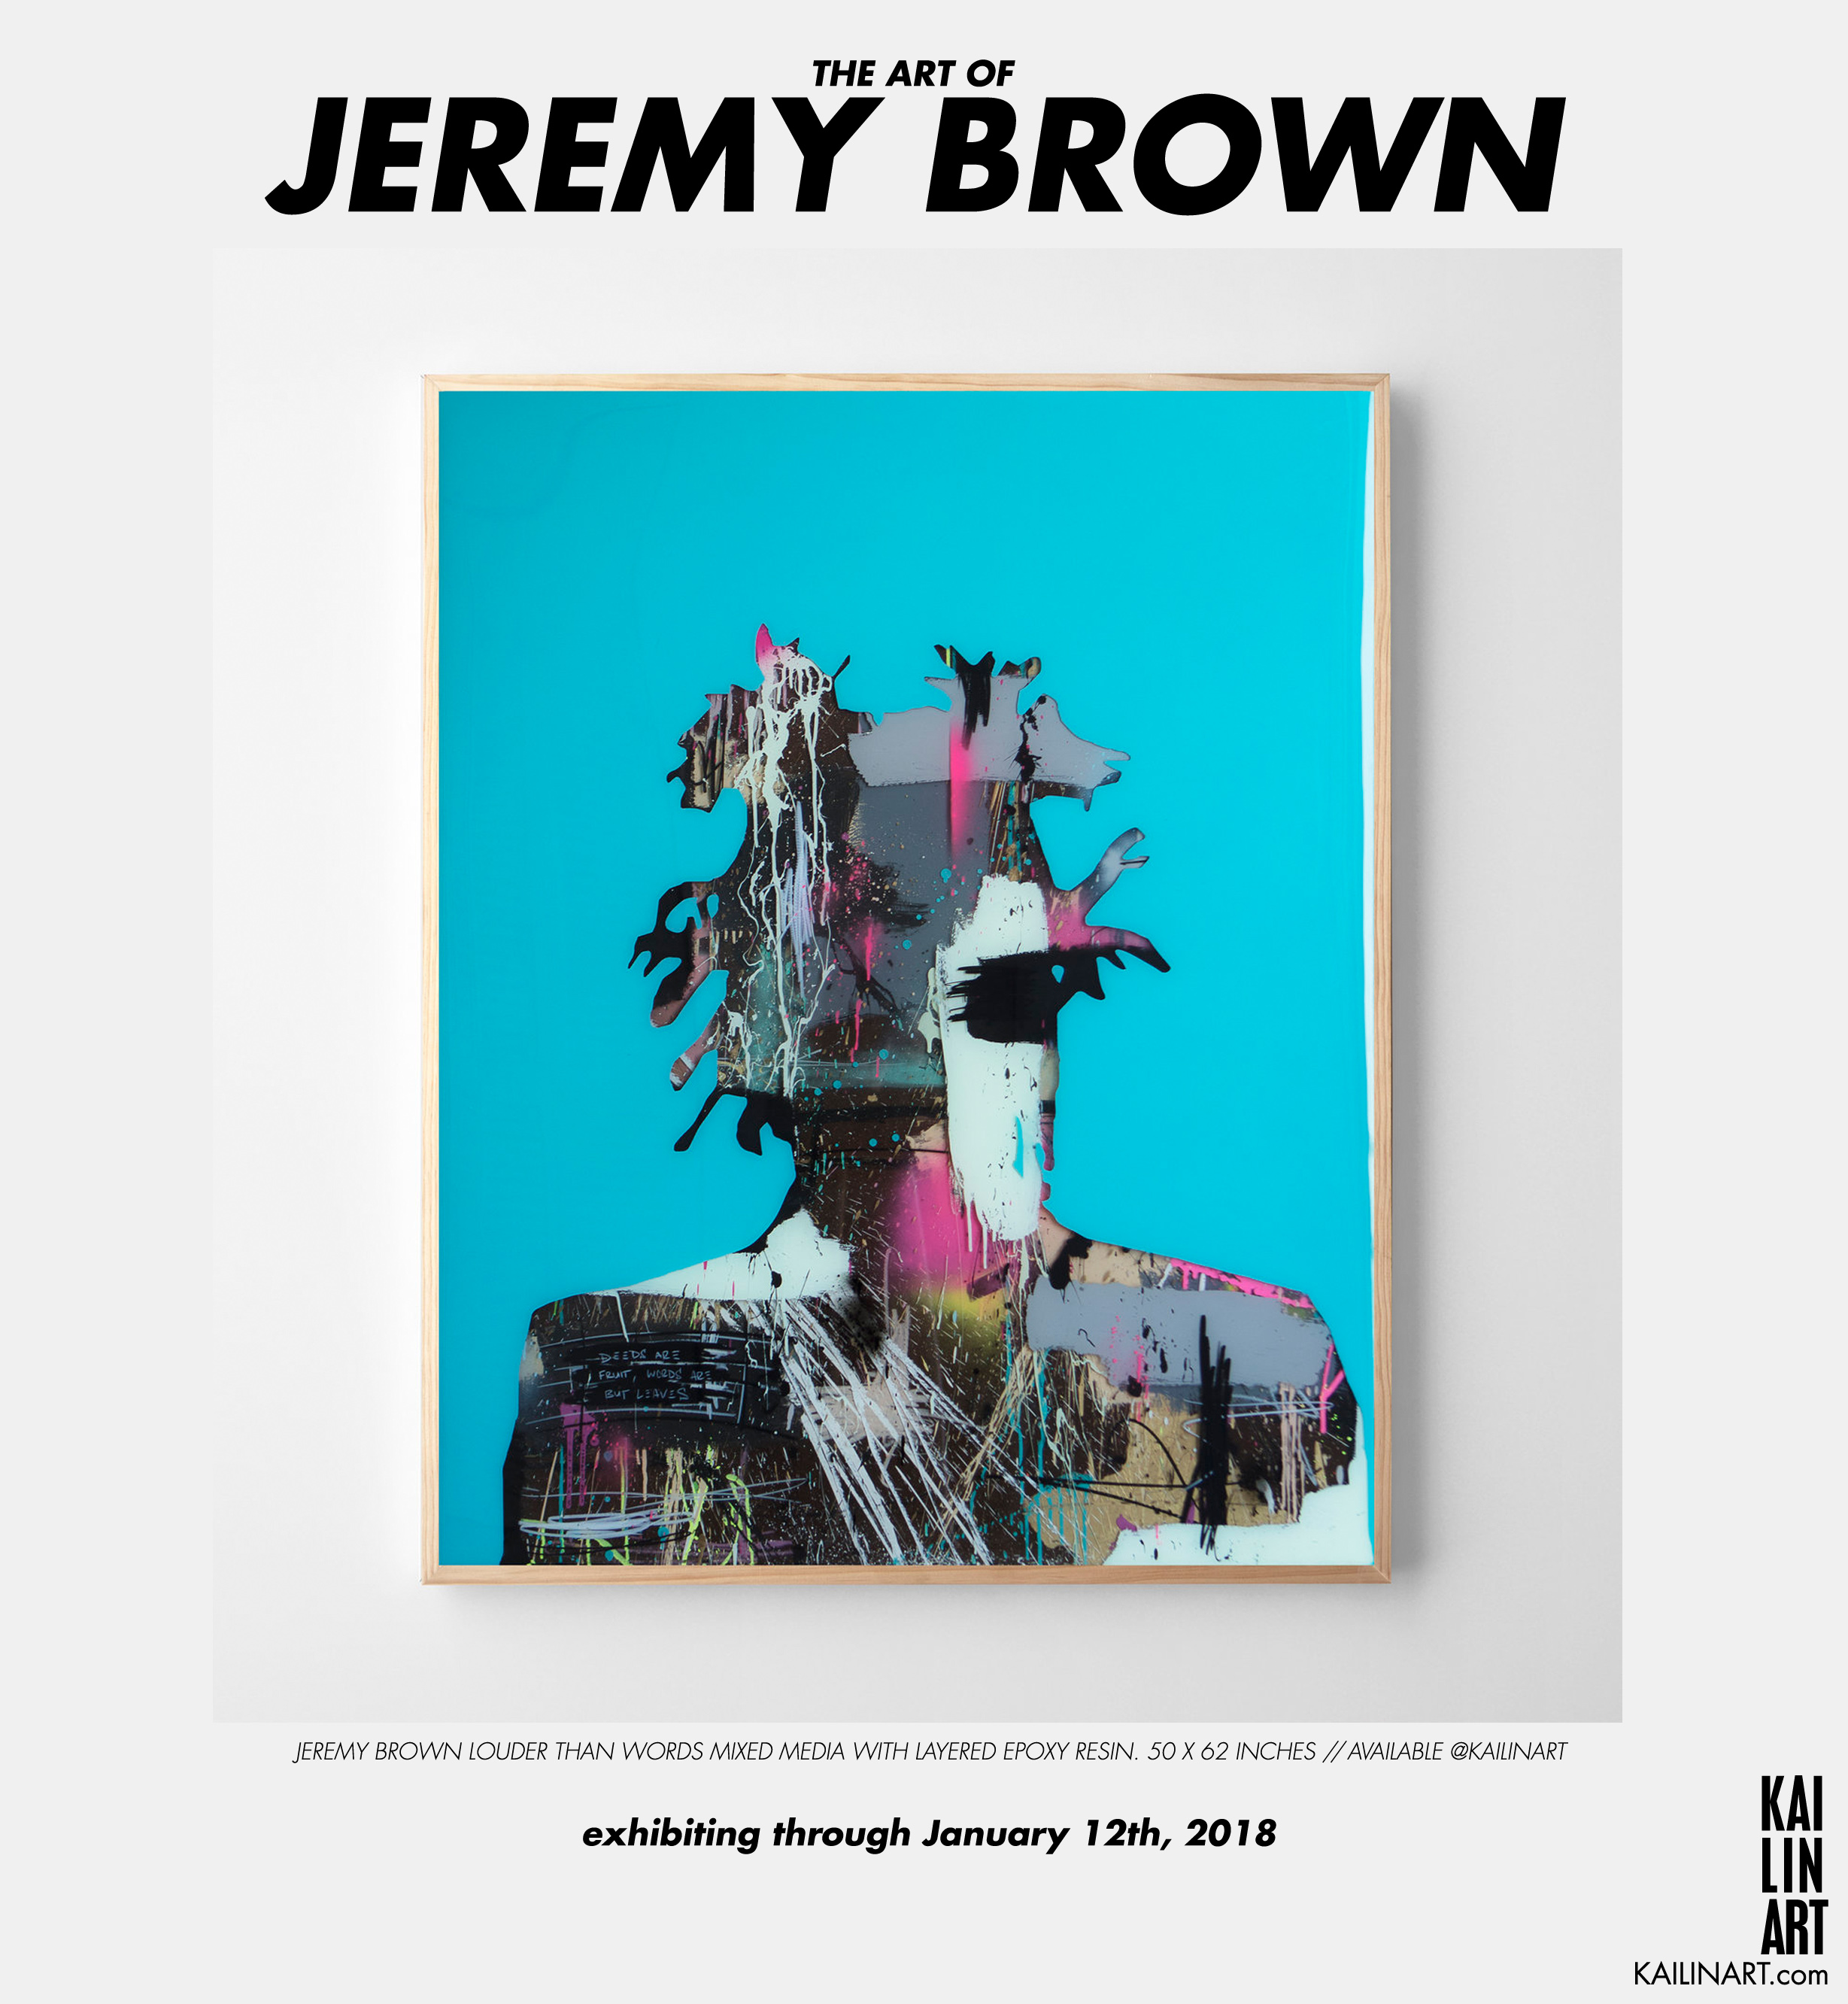 THE ART OF JEREMY BROWN